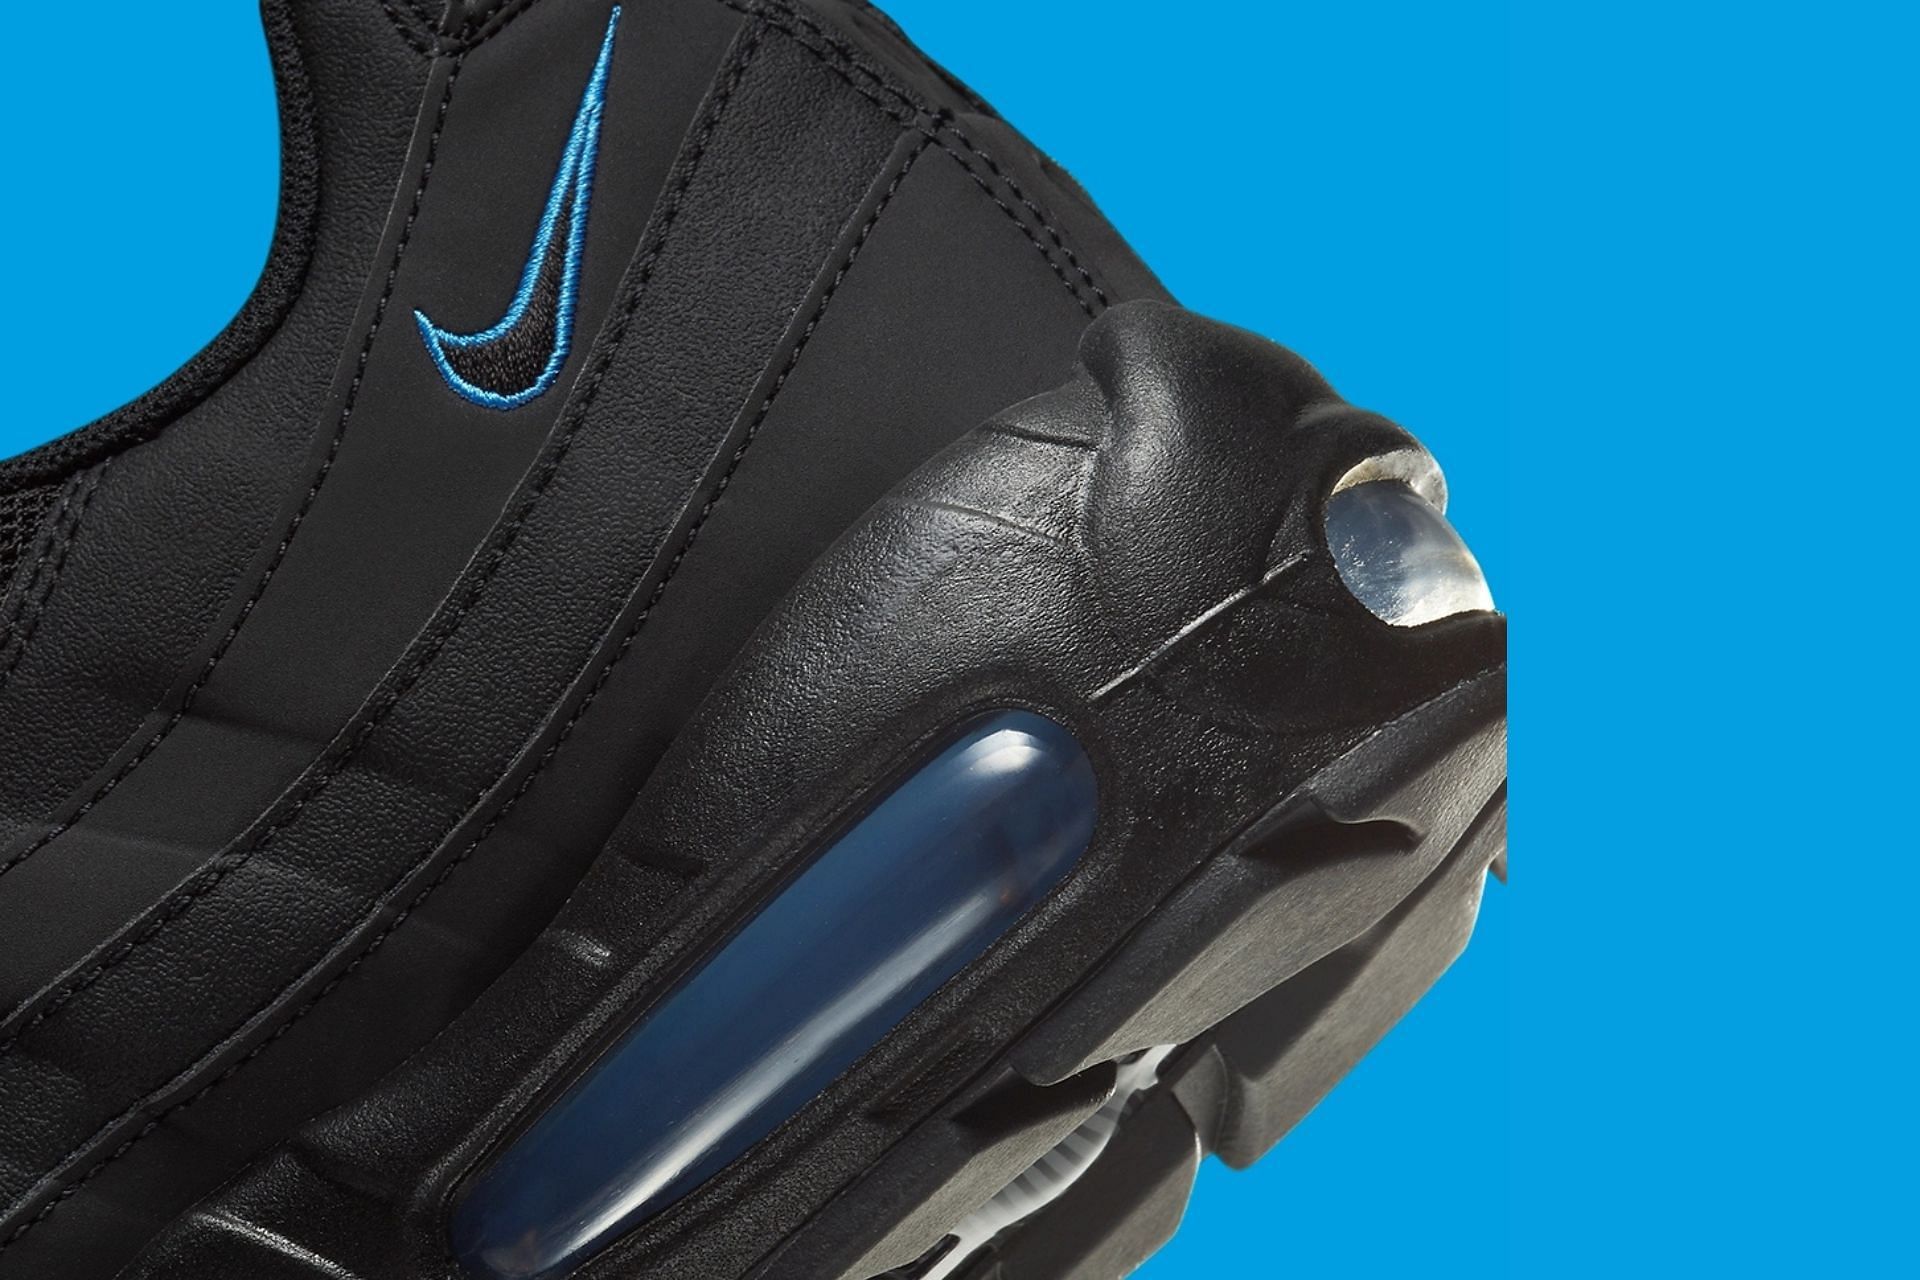 Take a closer look at the heel counters of the arriving shoes (Image via Nike)